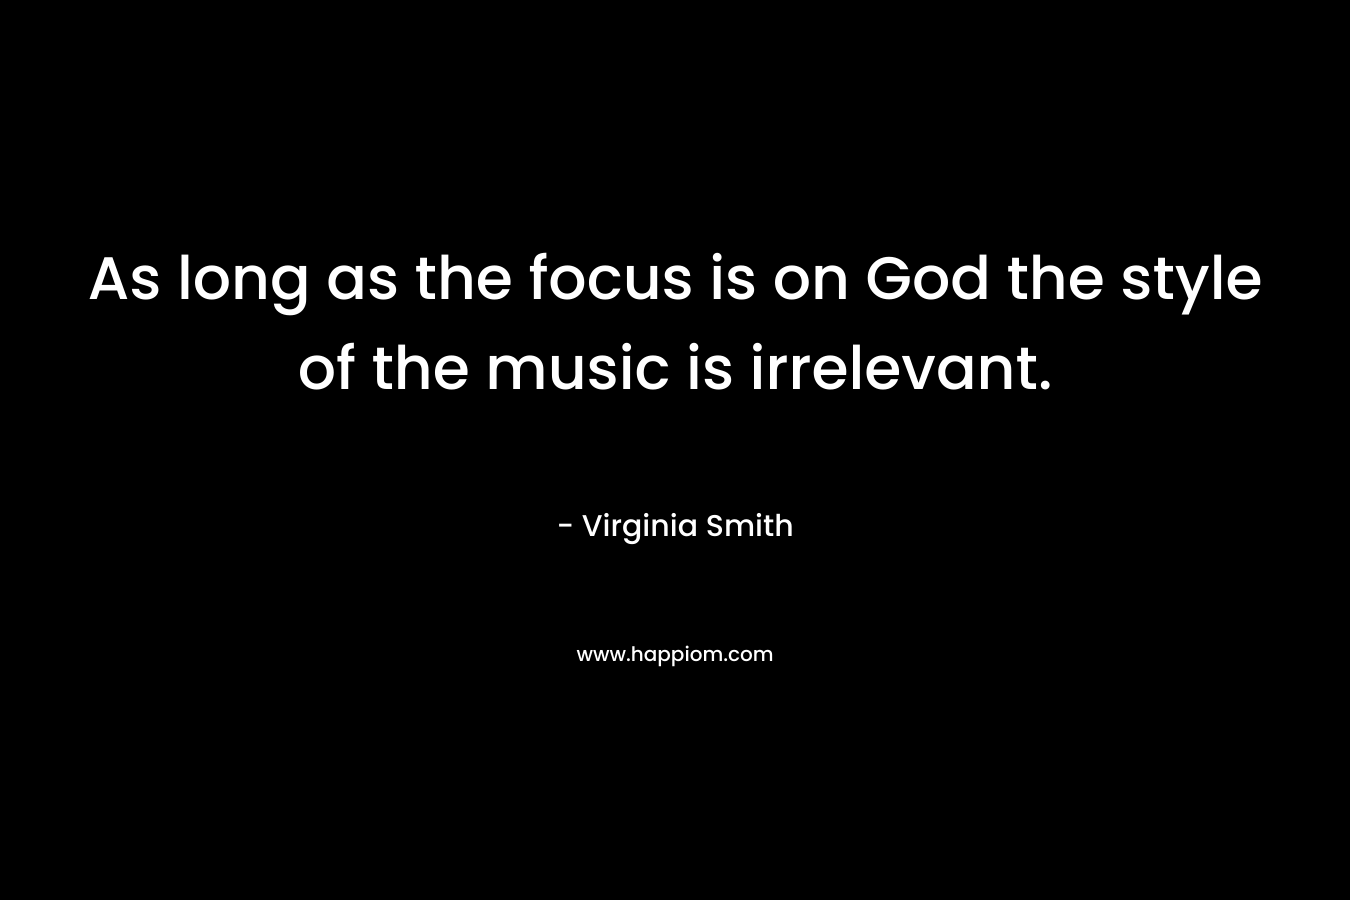 As long as the focus is on God the style of the music is irrelevant. – Virginia Smith